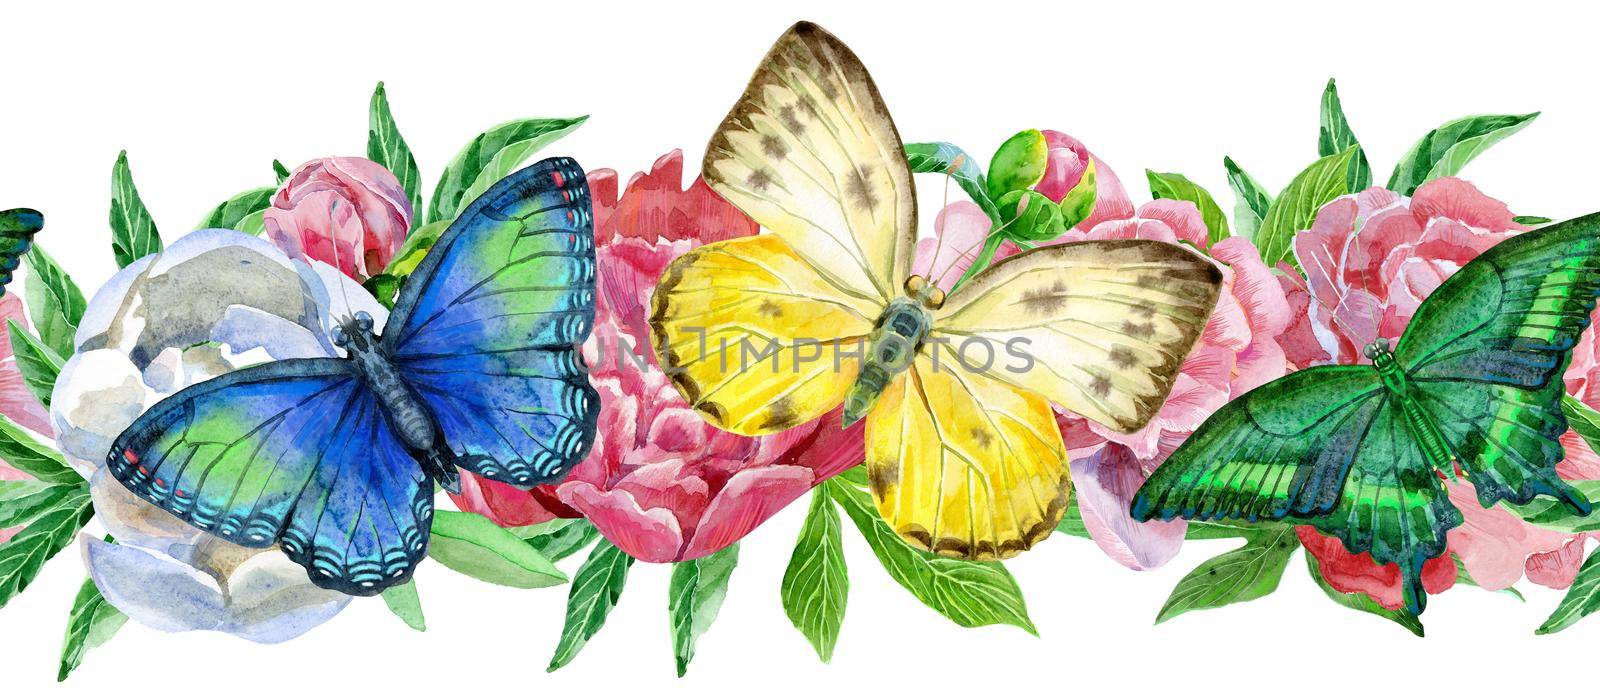 Seamless floral border with colorful butterflies and peonies on white background. Artistic design for floral print for packaging, textile, wallpaper, gift wrap, greeting or wedding background.